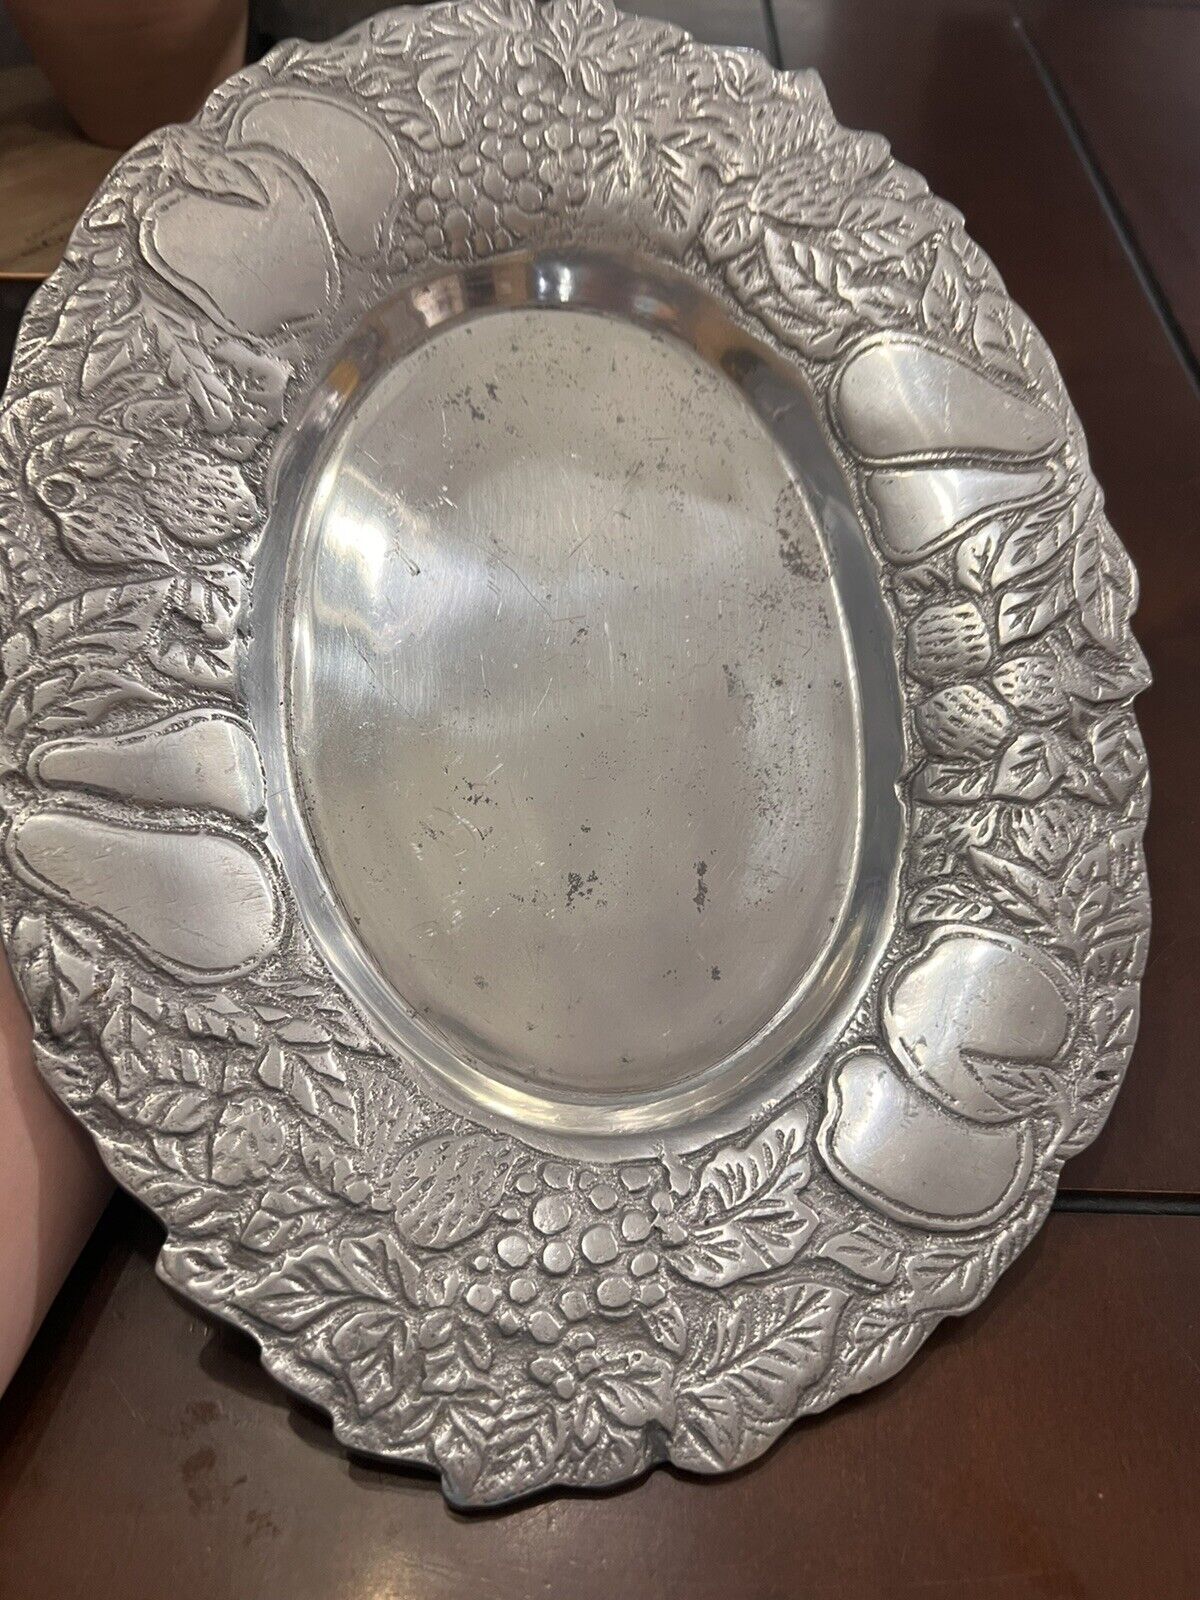 Beautiful Vintage Oval Tray Serving Platter Fruit Pewter Handcrafted 15.5”x11.5”